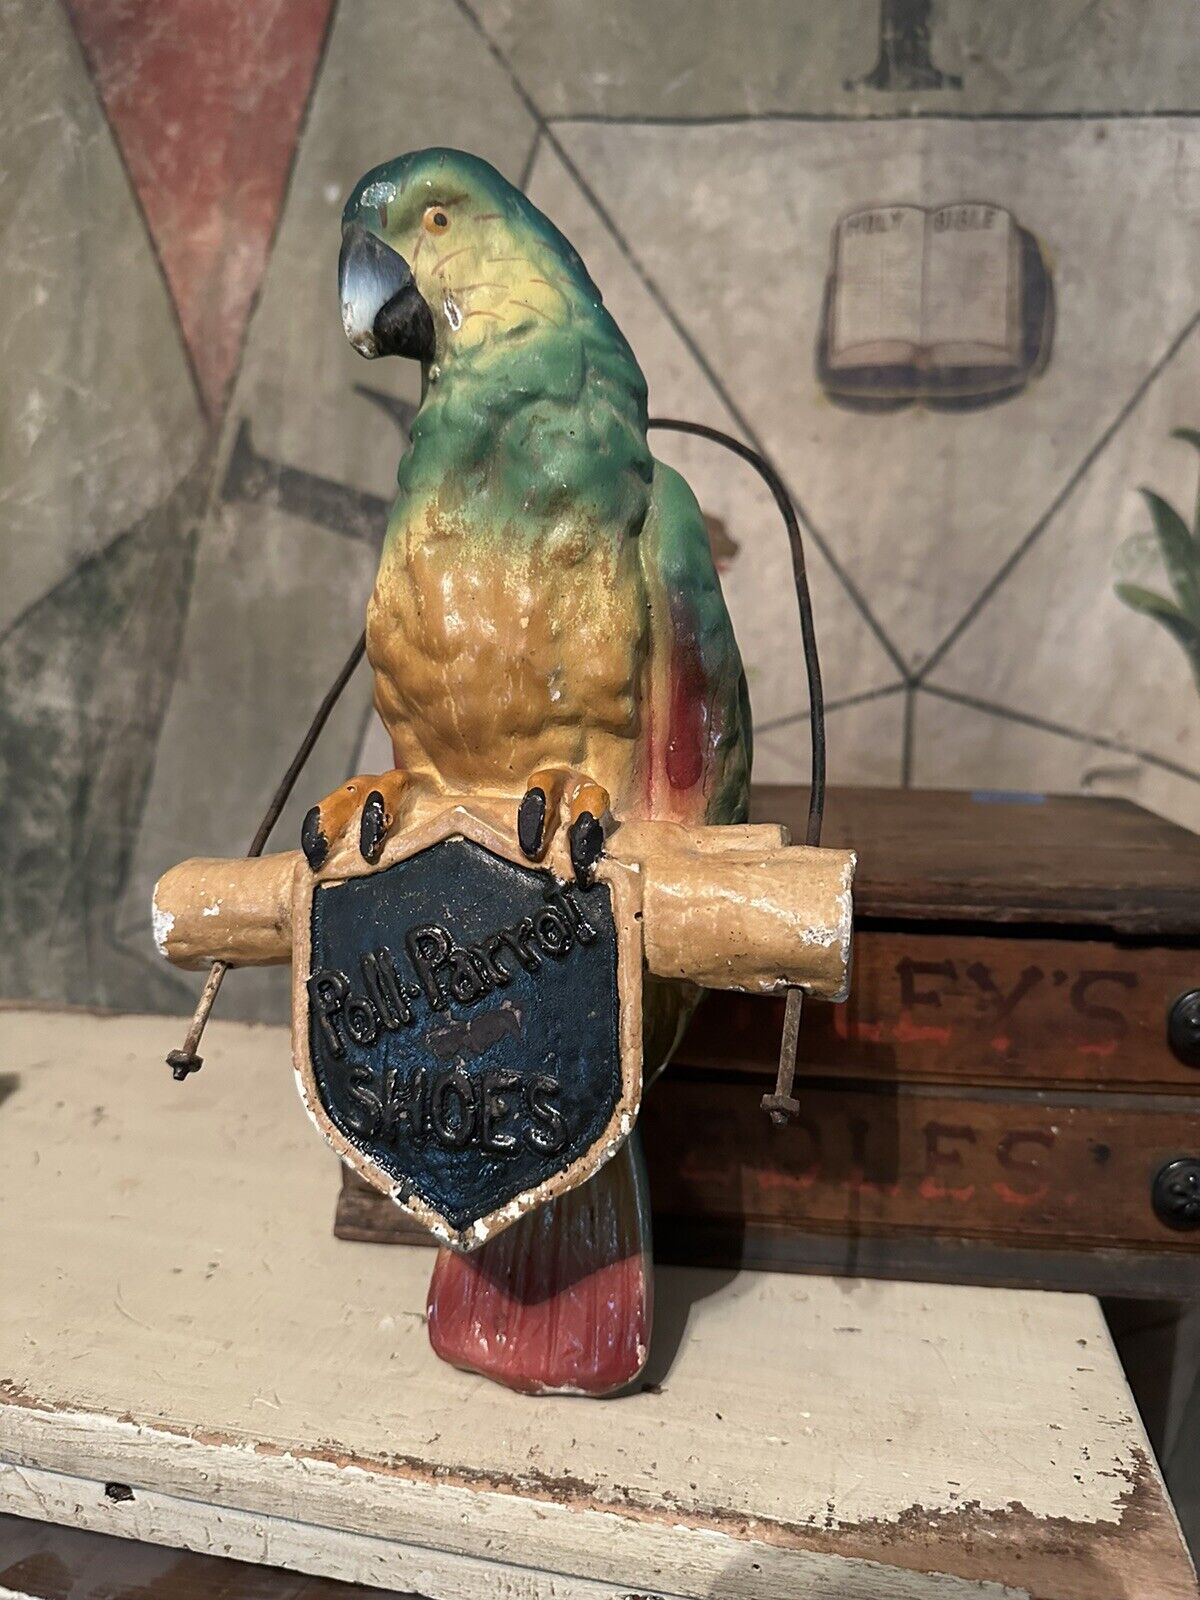 1930s ANTIQUE POLL PARROT SHOES VINTAGE CLOTHING STORE SIGN advertising plaster